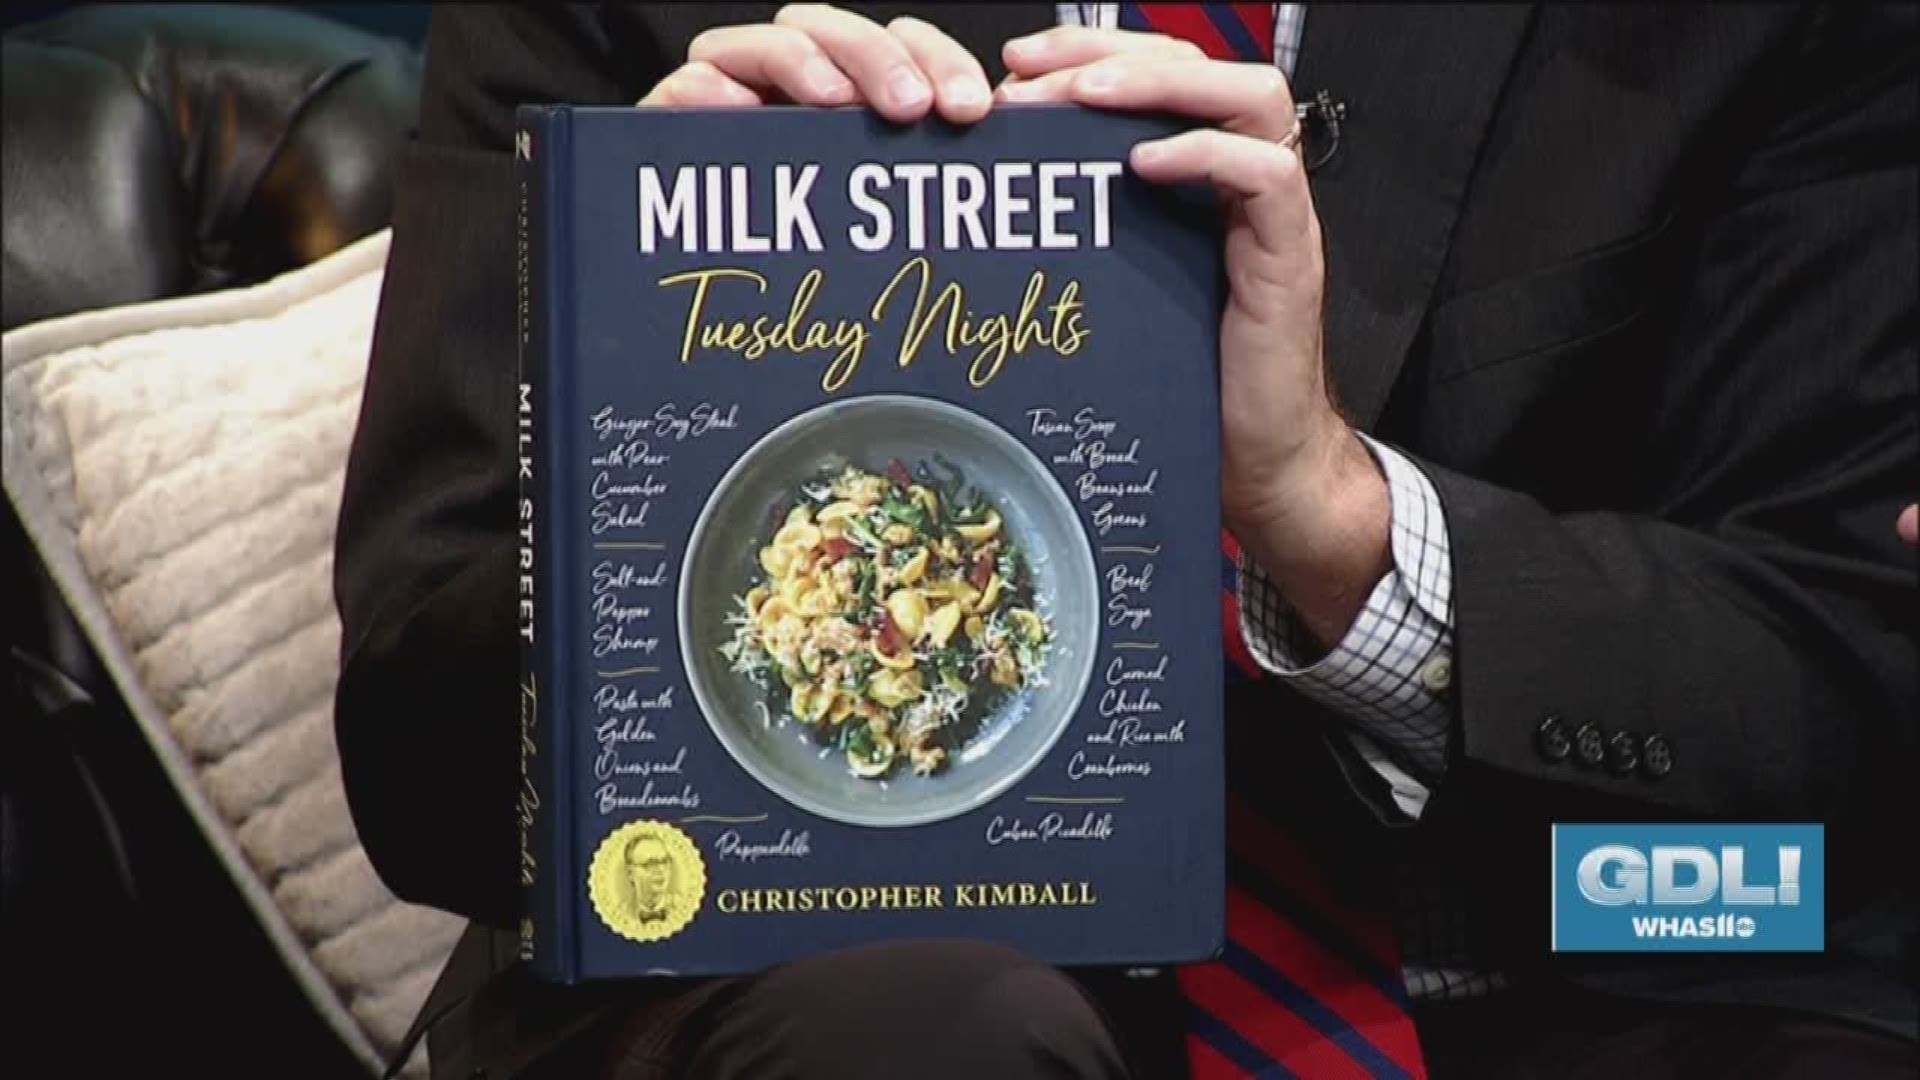 Christopher Kimball, who is the author of the cookbook "Tuesday Nights," is in Louisville for a signing on December 13, 2018 at 7 PM at Copper and Kings in Butchertown.